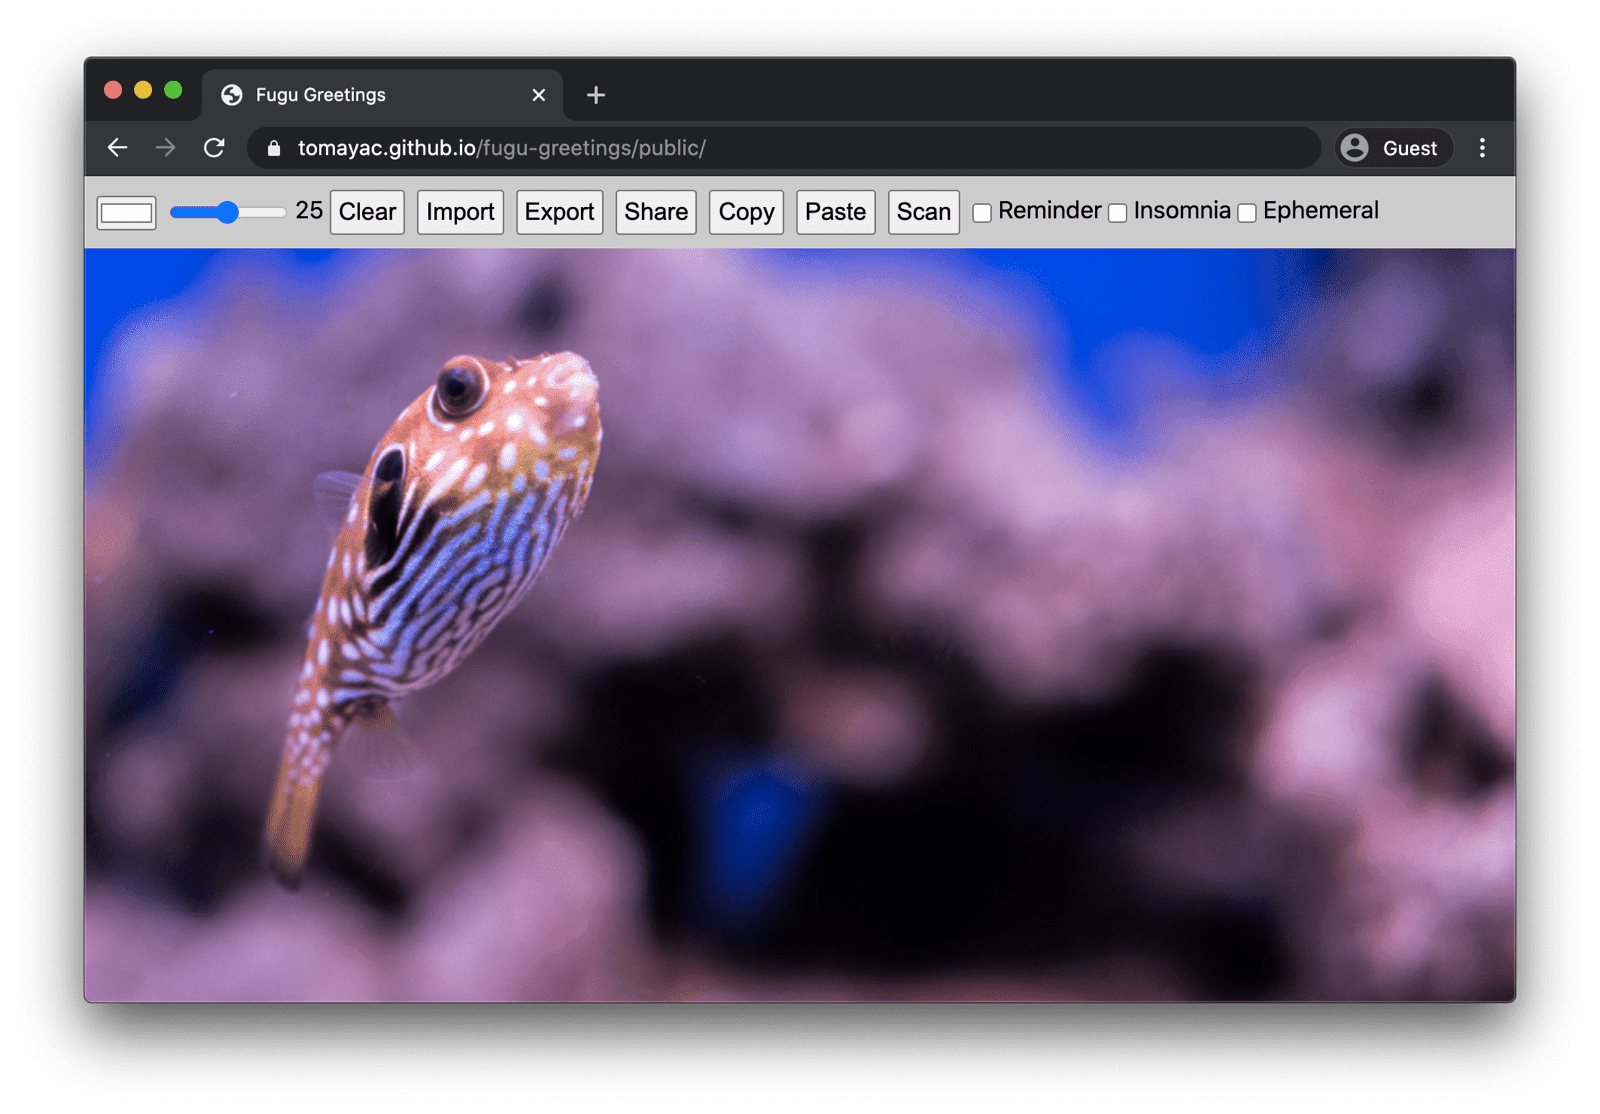 Fugu Greetings running on desktop Chrome, showing many available features.